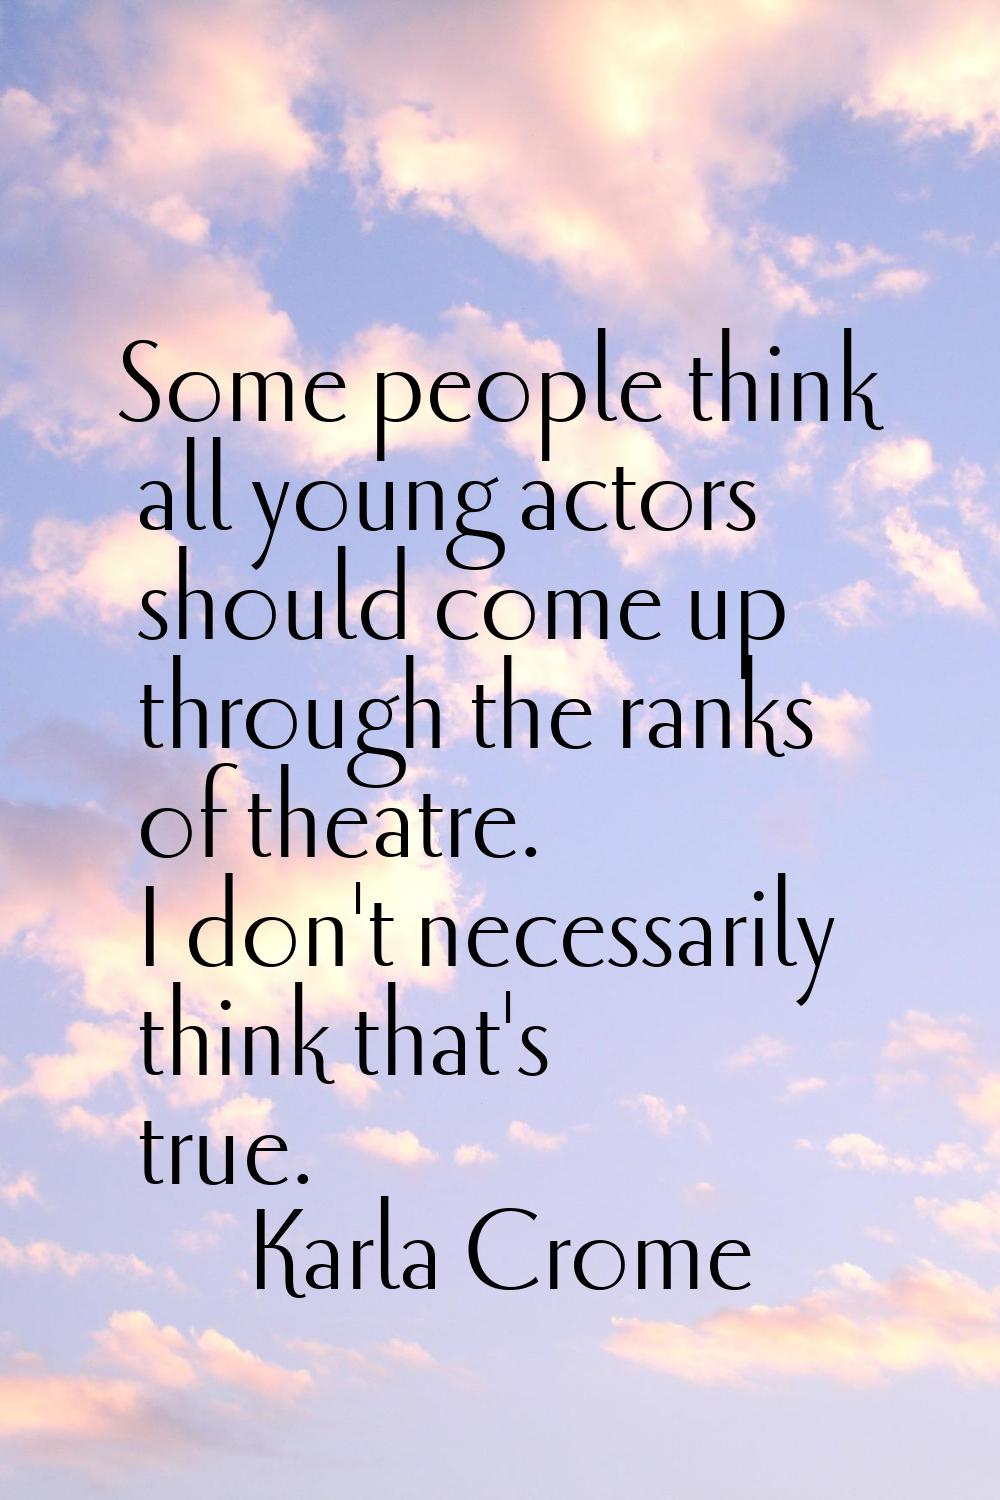 Some people think all young actors should come up through the ranks of theatre. I don't necessarily